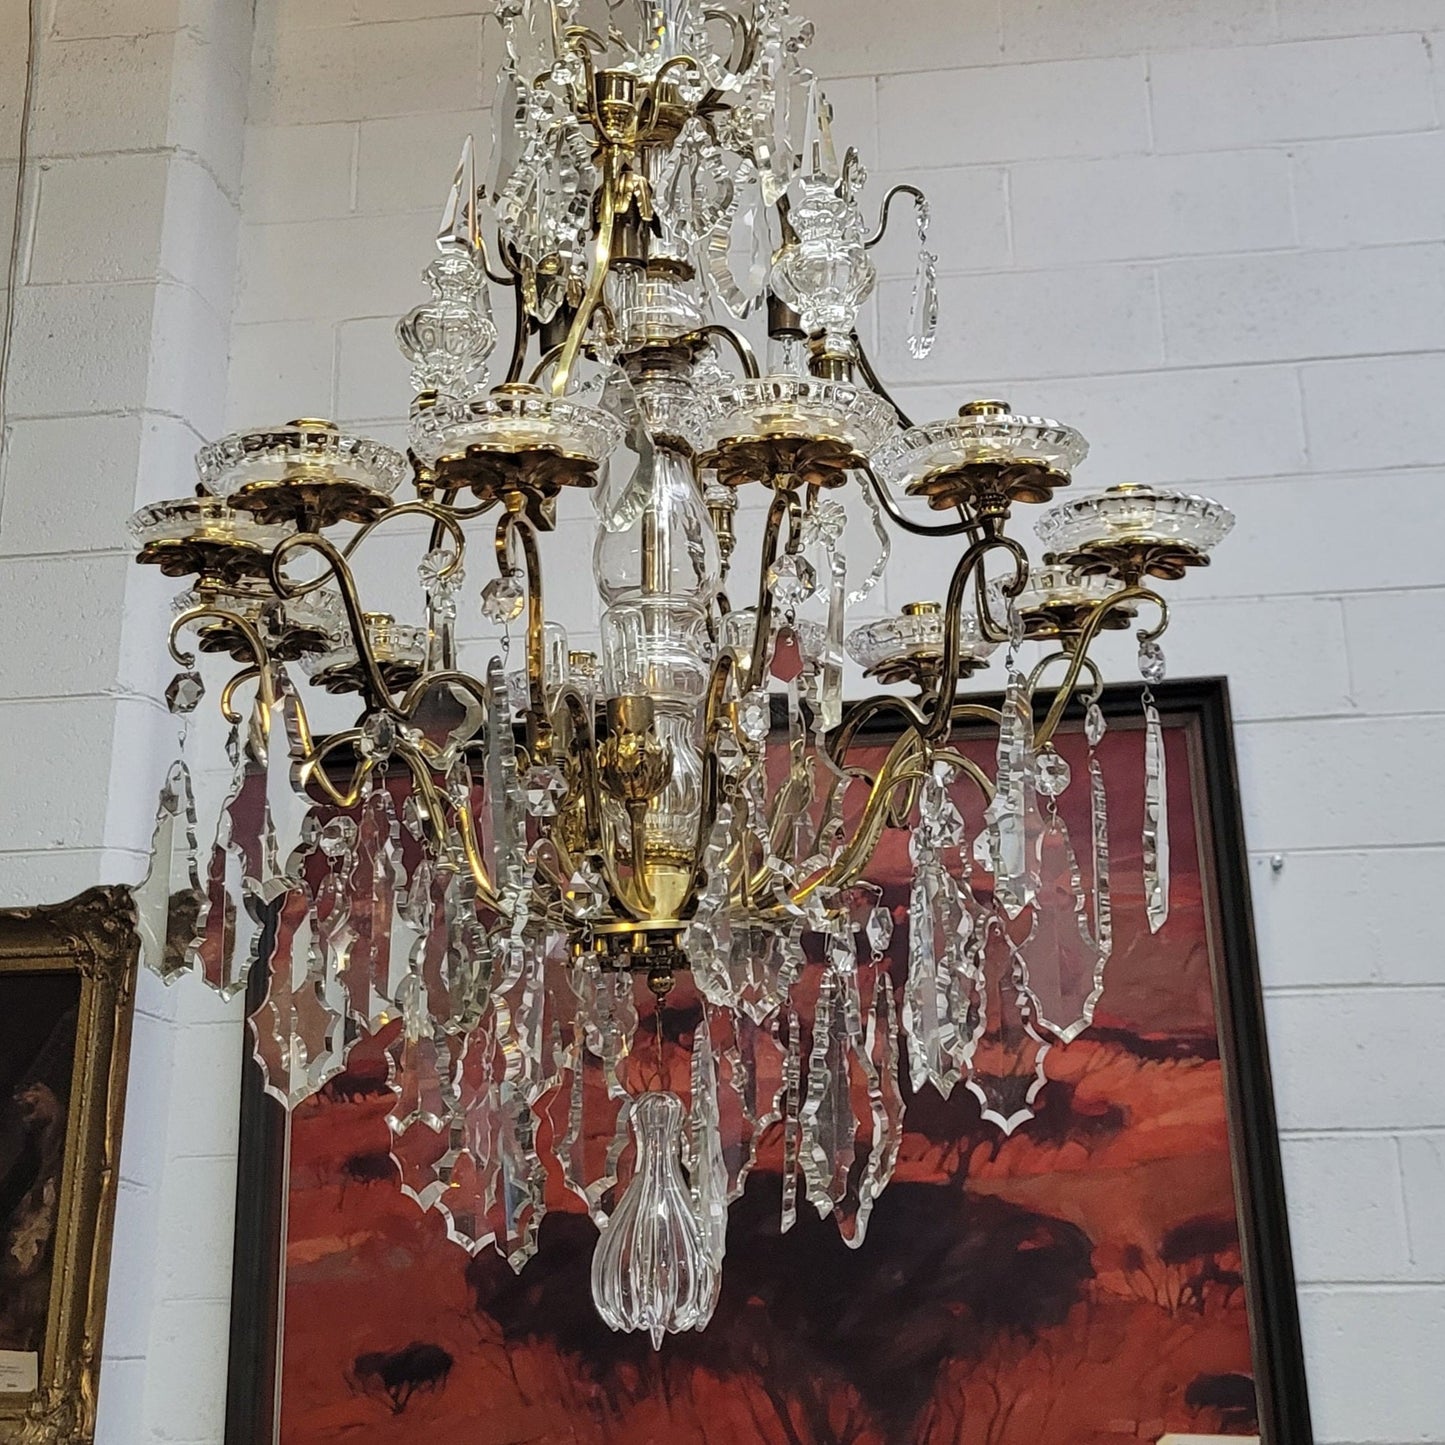 Very Impressive French "Baccarat" 12 Arm Chandelier